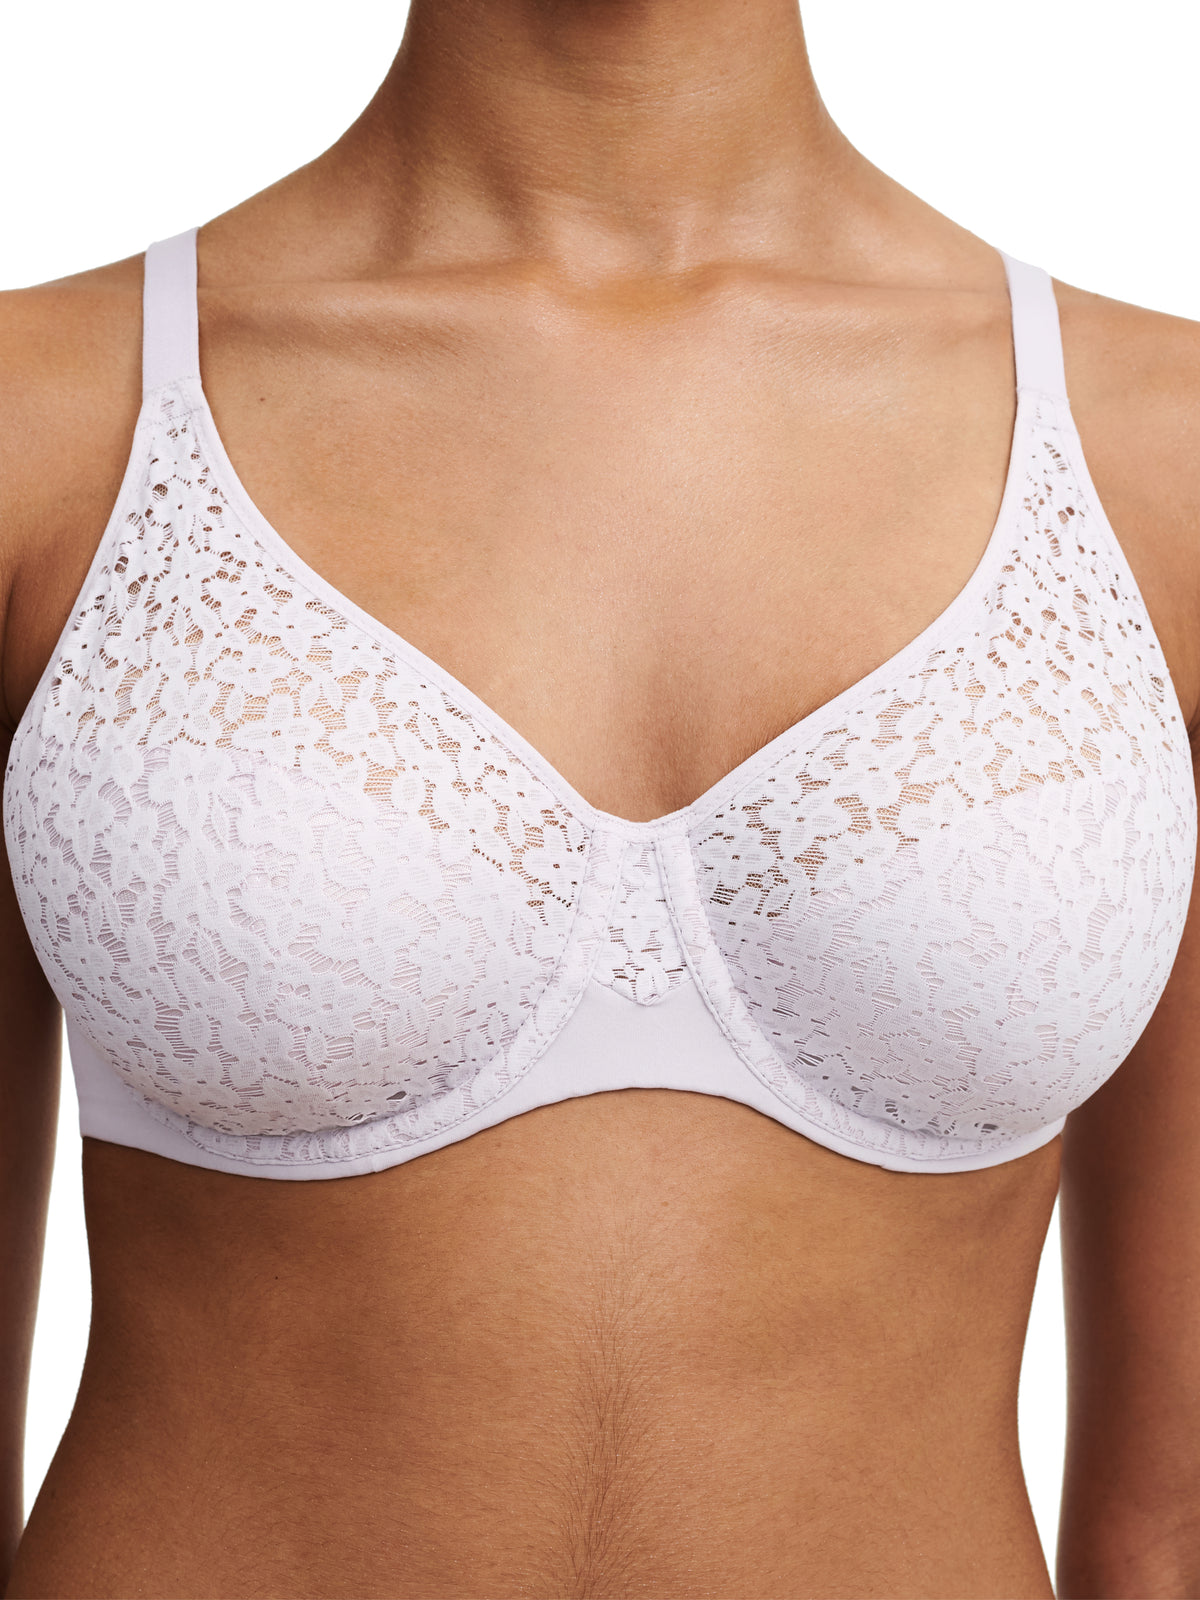 Chantelle Norah Lace Unlined Molded